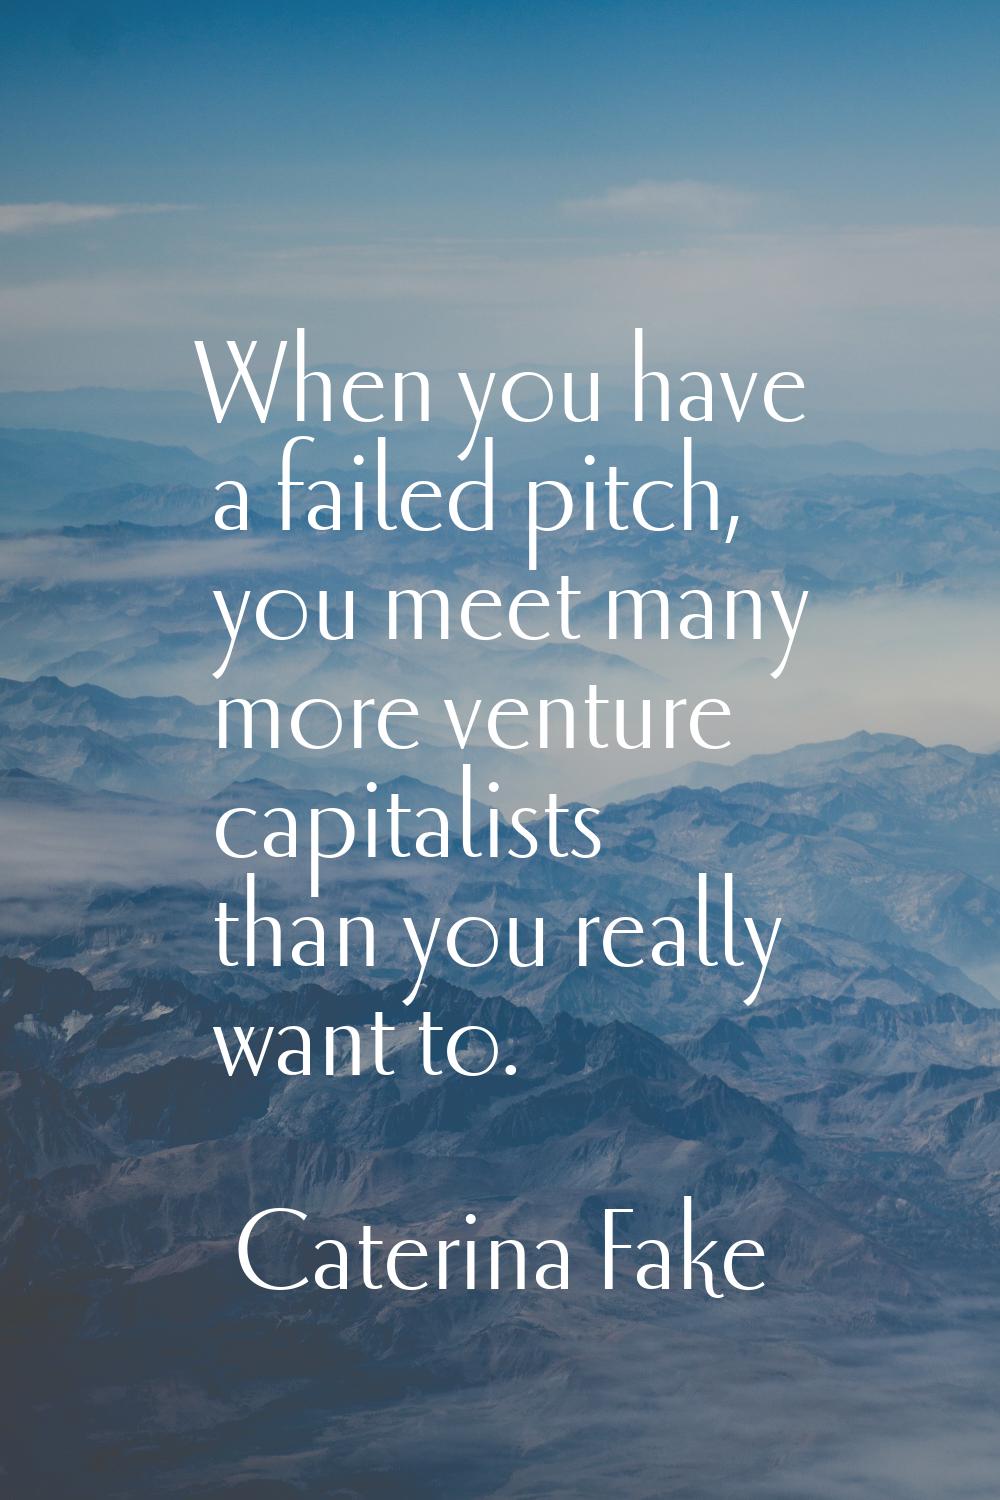 When you have a failed pitch, you meet many more venture capitalists than you really want to.